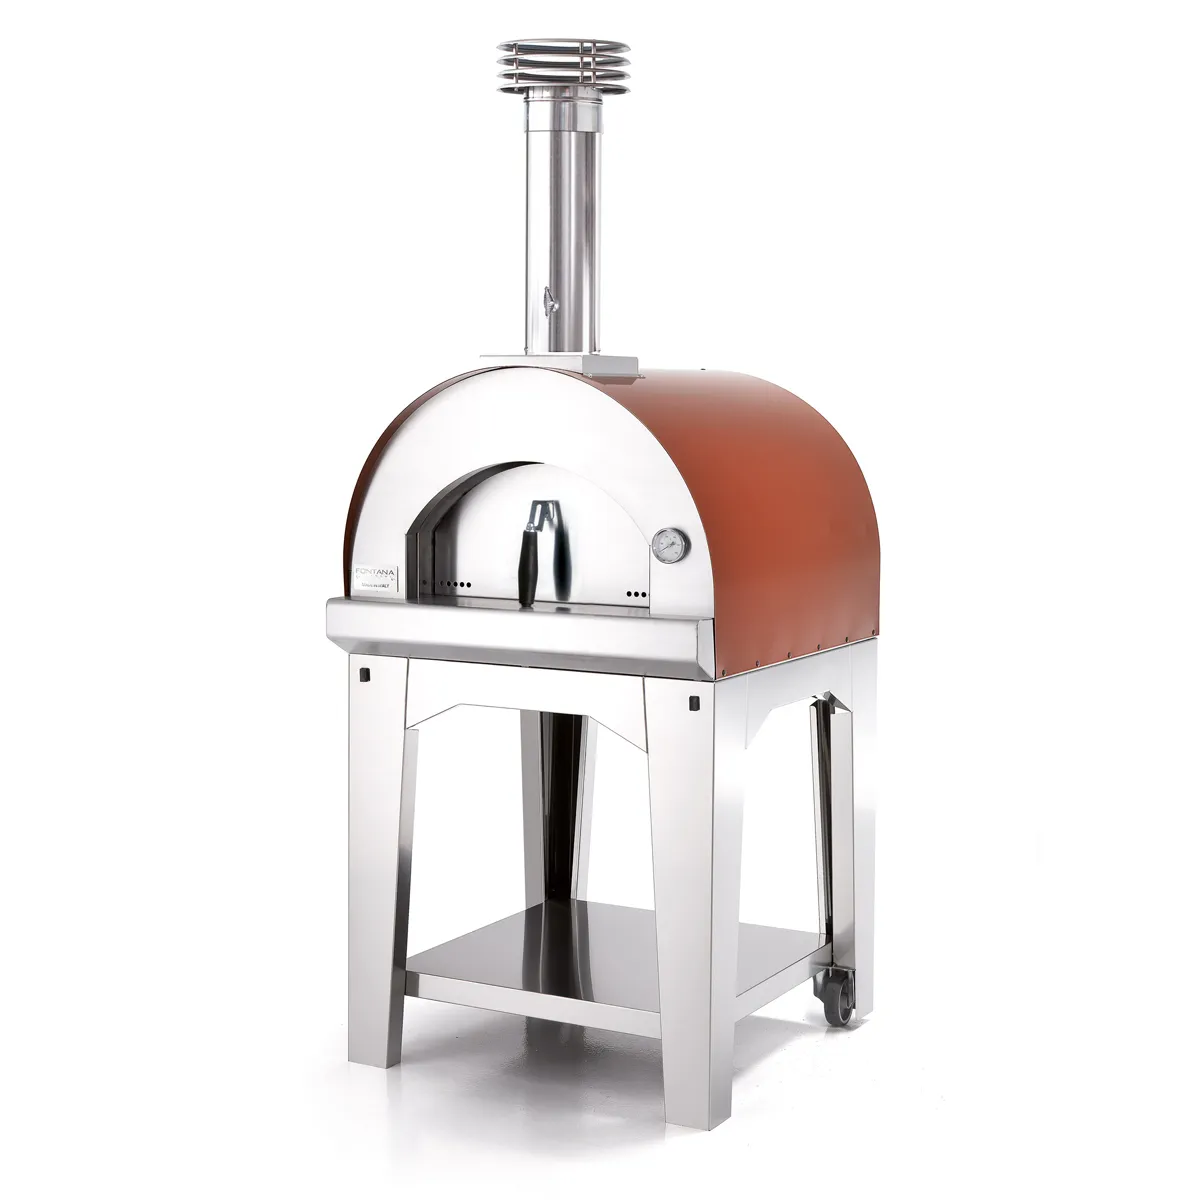 Fontana Margherita Rosso Wood Pizza Oven + Trolley